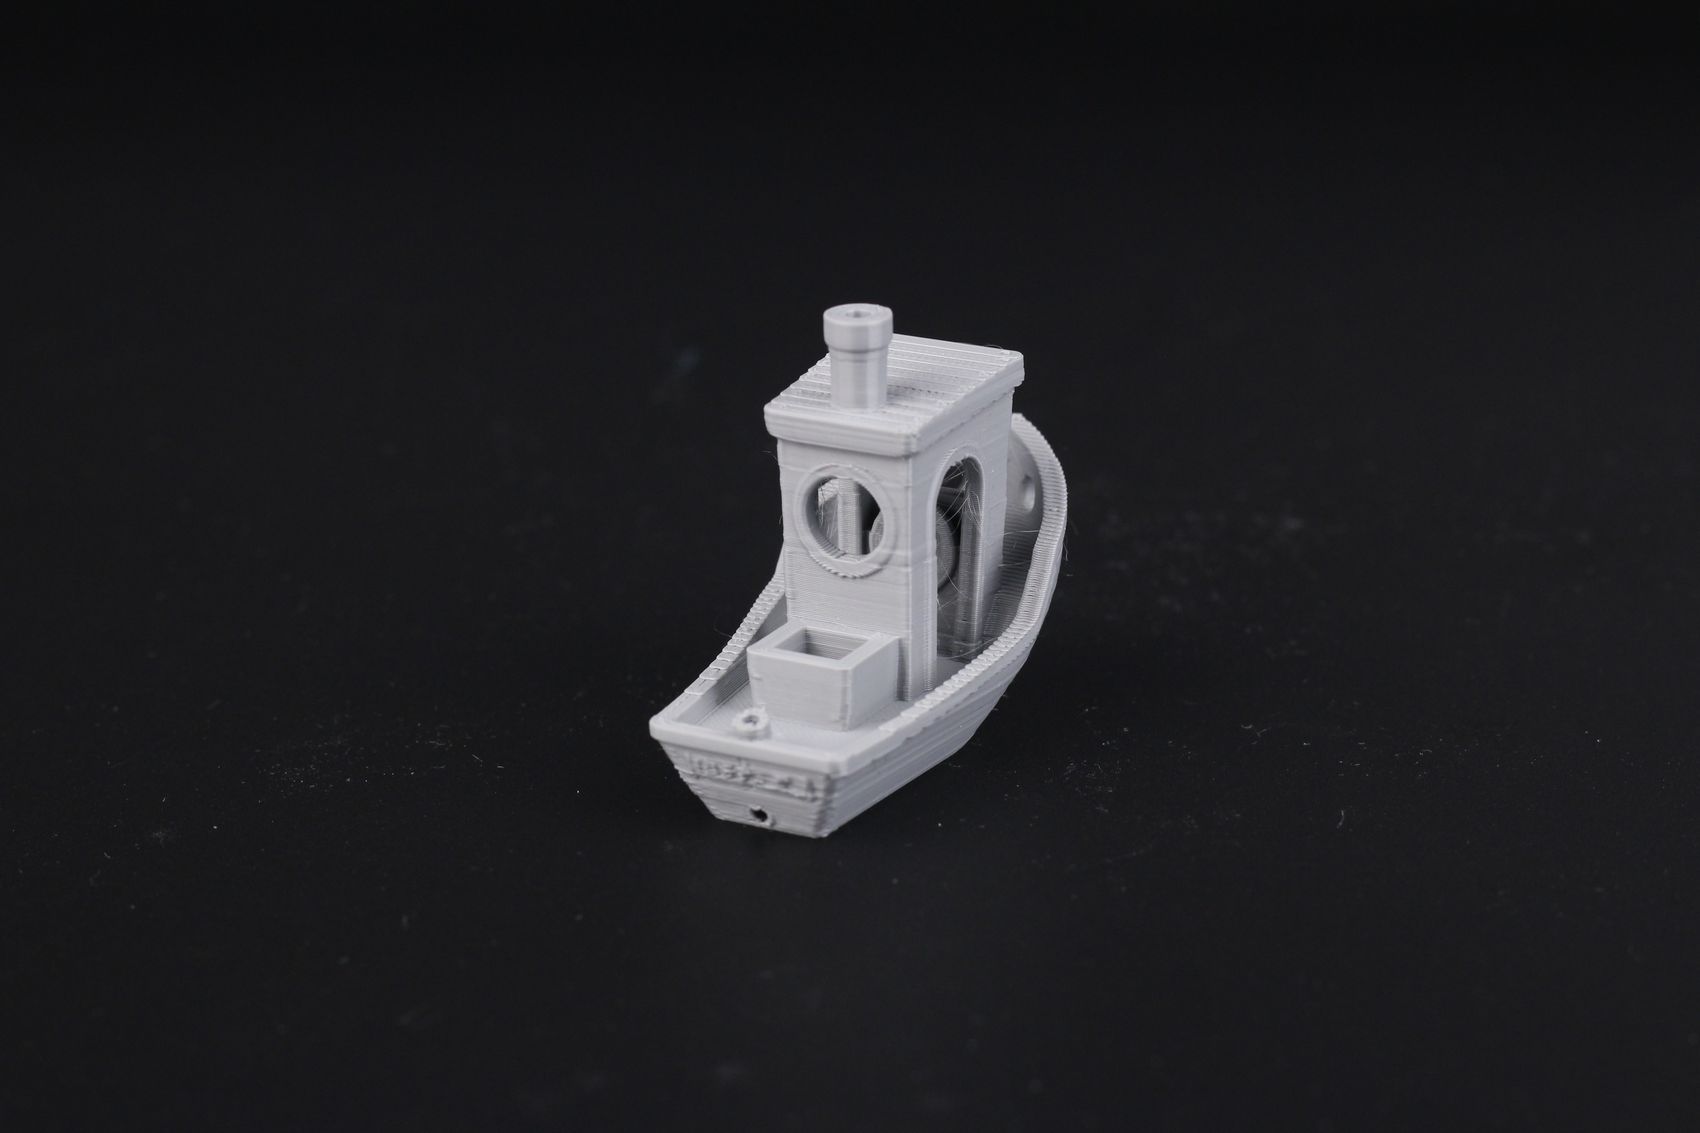 3D Benchy printed on the Anycubic Kobra Plus2 | Anycubic Kobra Plus Review: A Larger Vyper